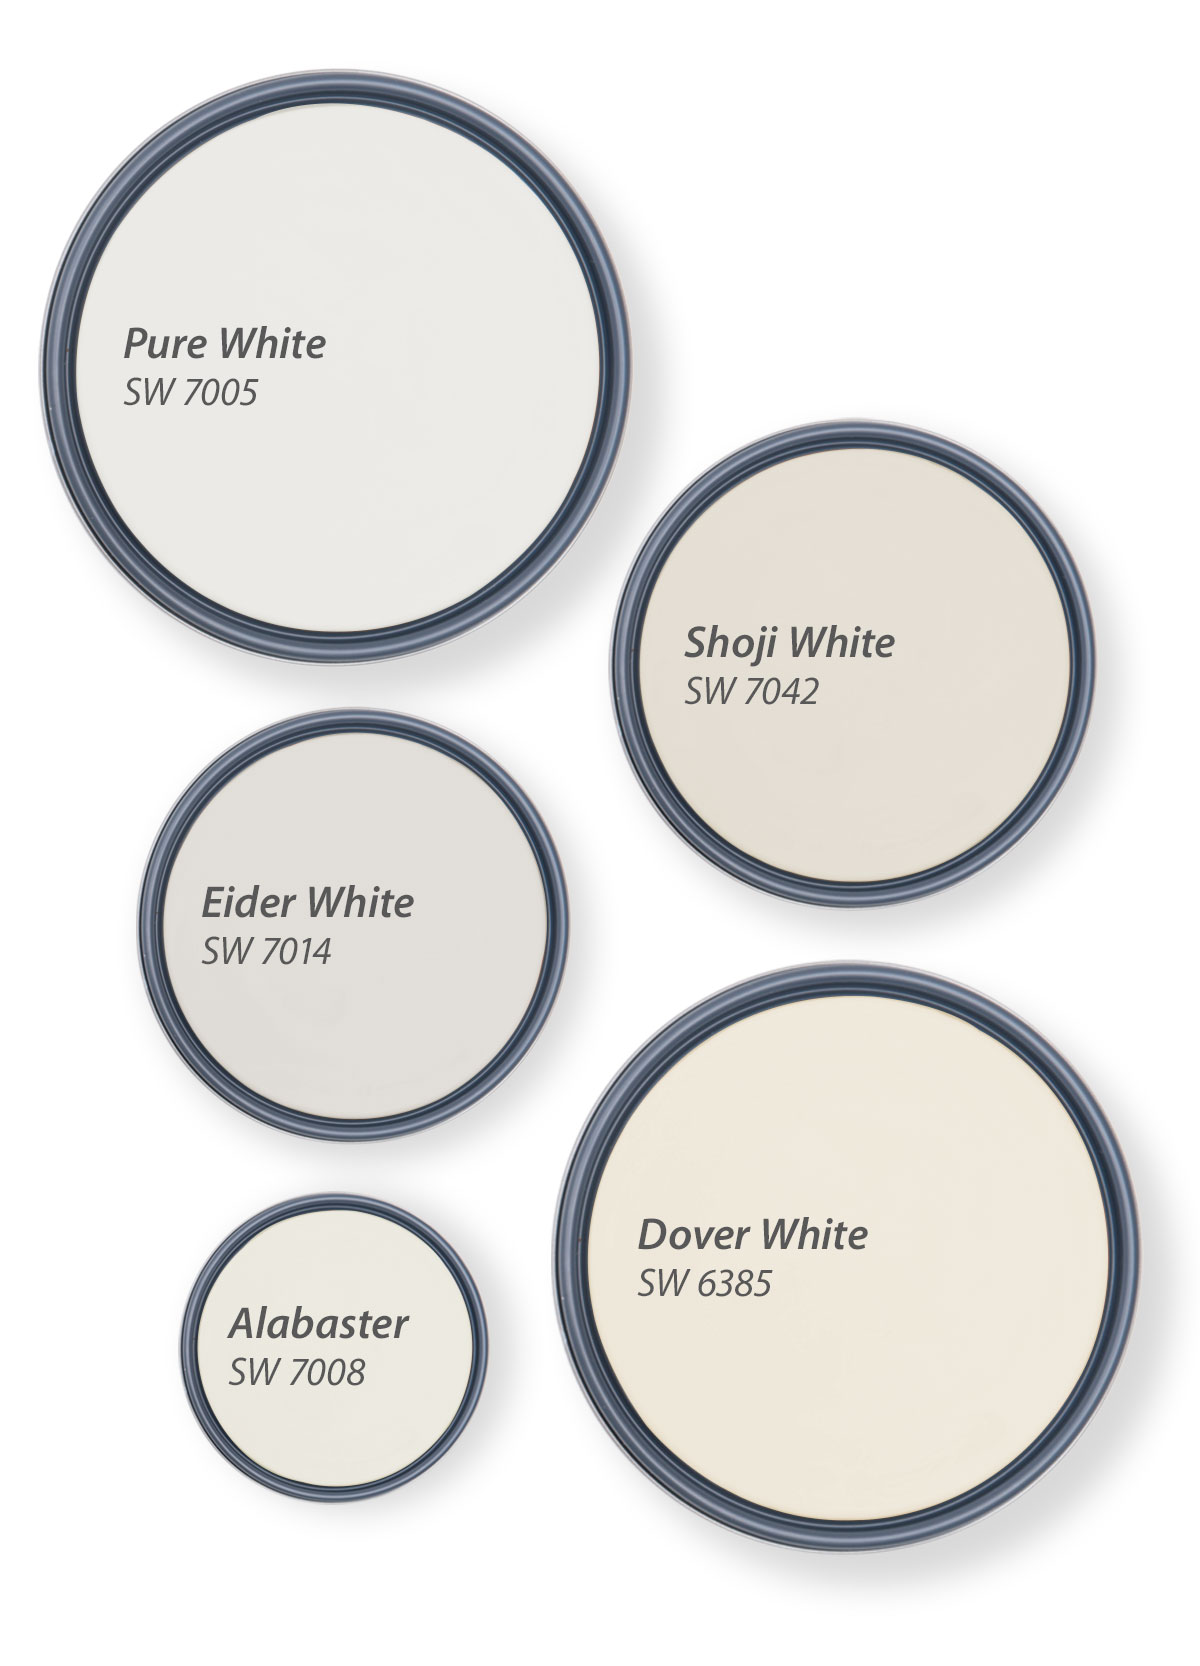 Our Top 5 Shades of White Tinted by SherwinWilliams